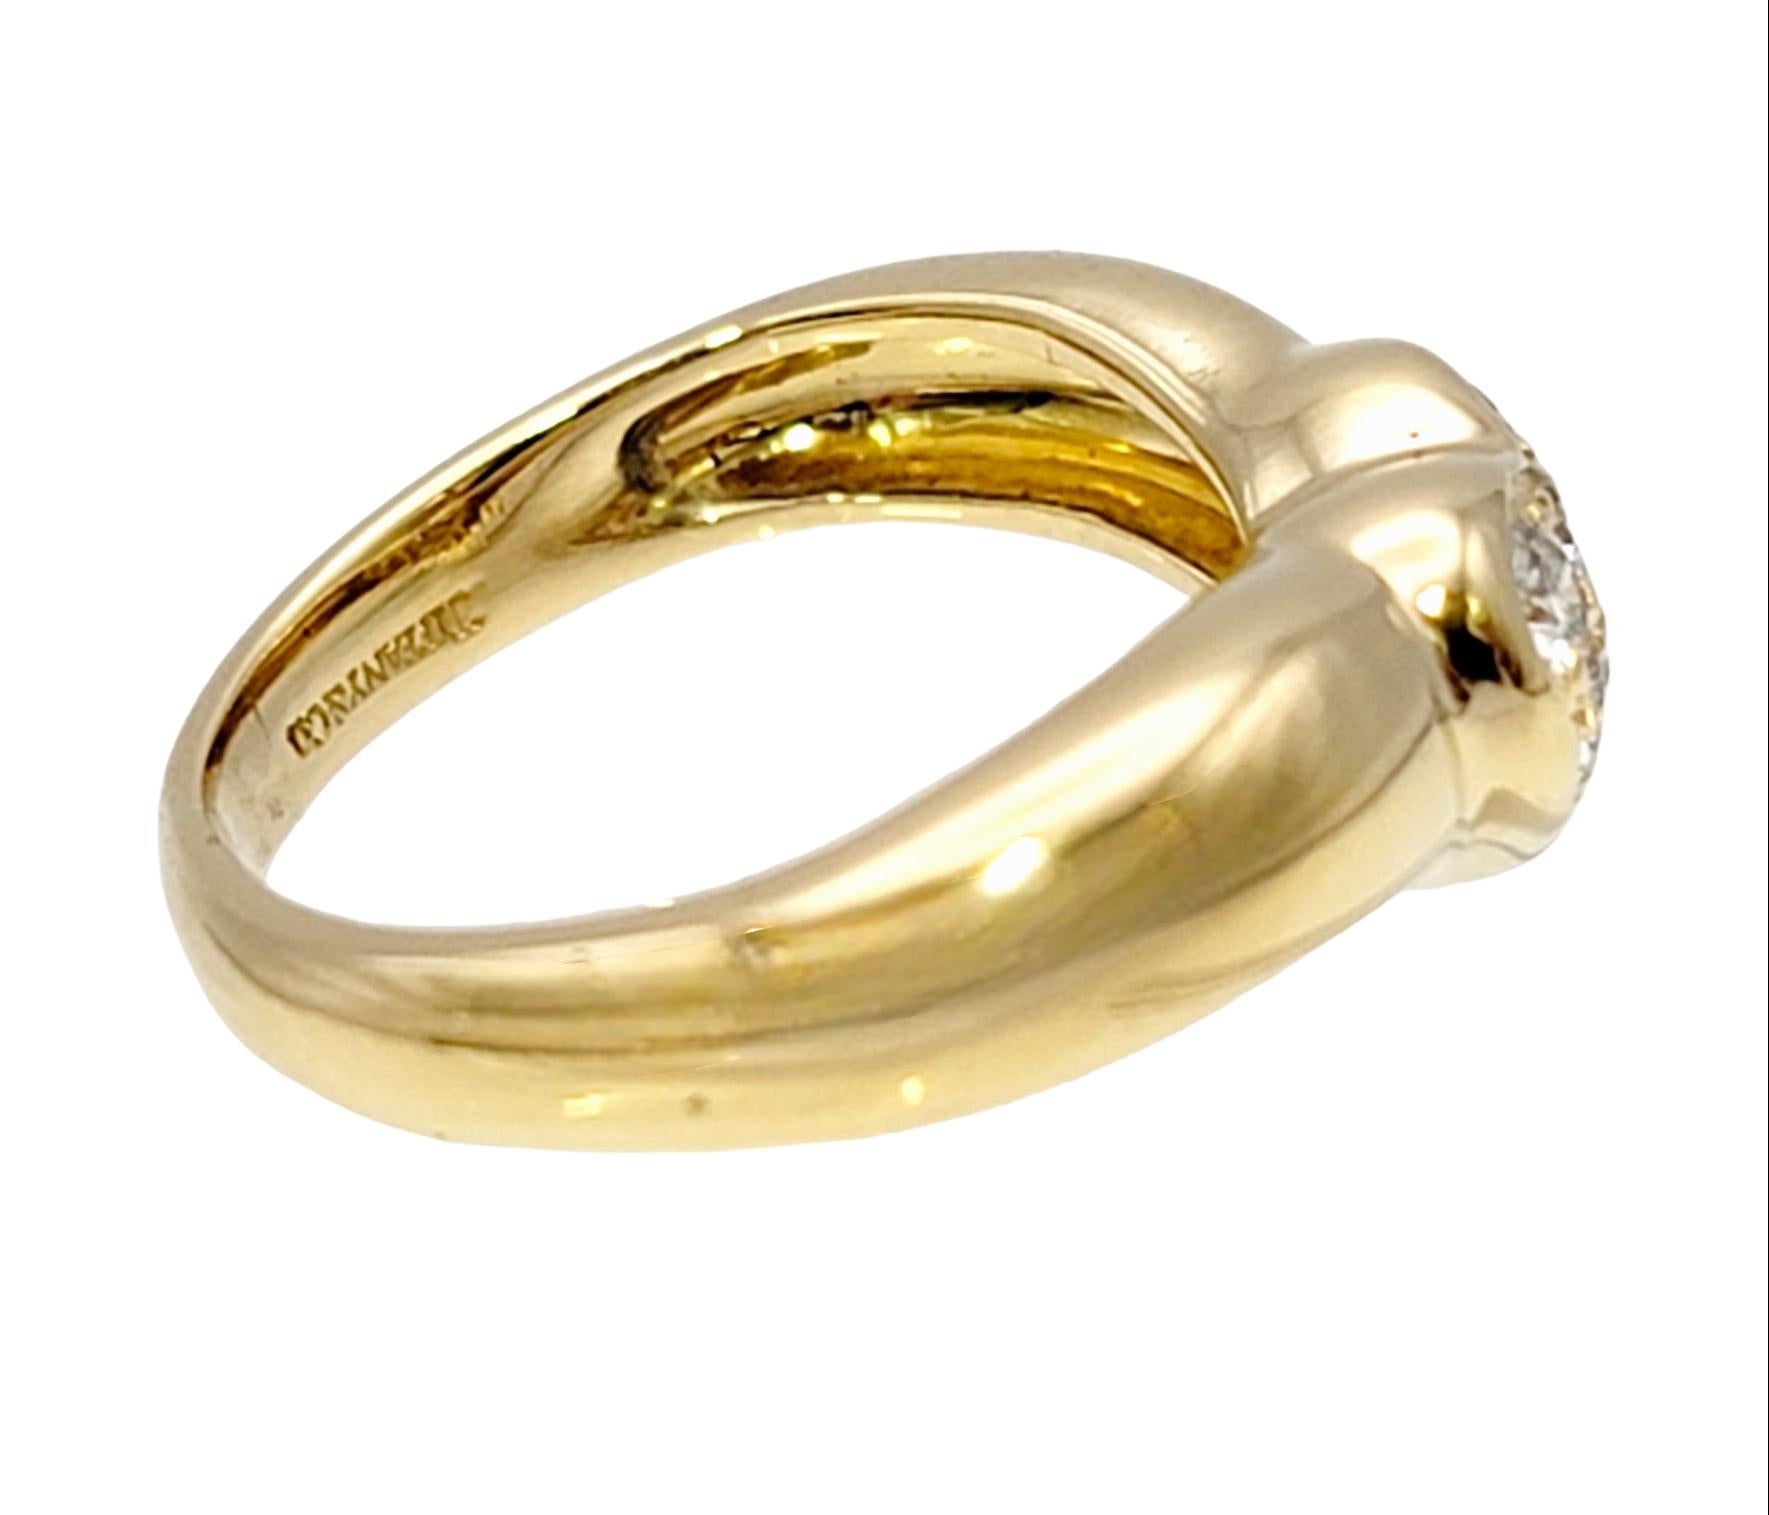 Vintage Tiffany & Co. Etoile Round Brilliant Diamond Heart Yellow Gold Band Ring In Good Condition For Sale In Scottsdale, AZ